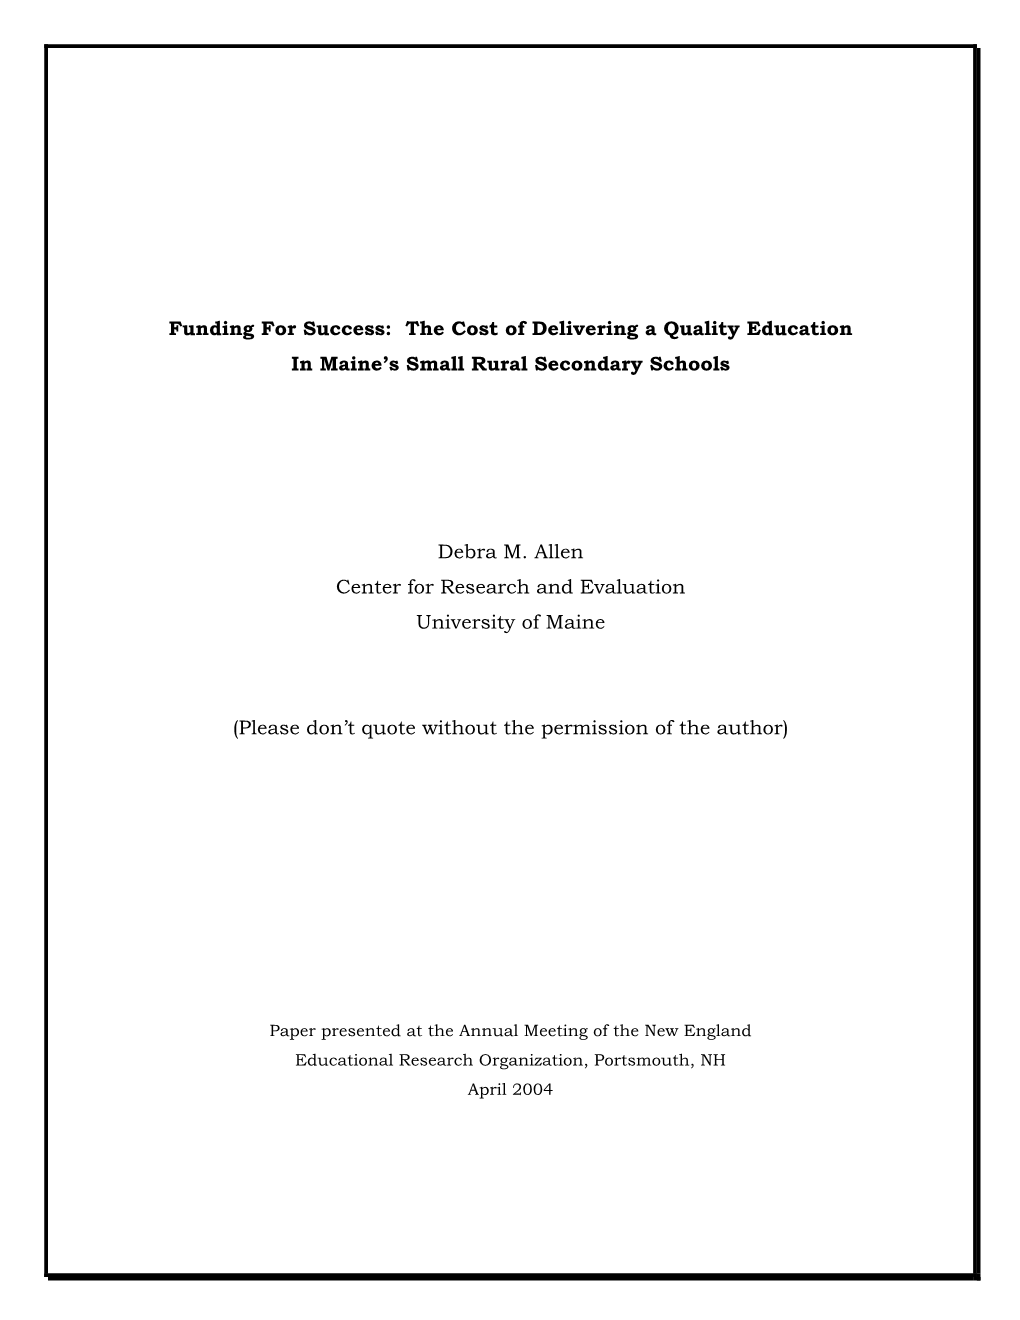 The Cost of Delivering a Quality Education in Maine's Small Rural